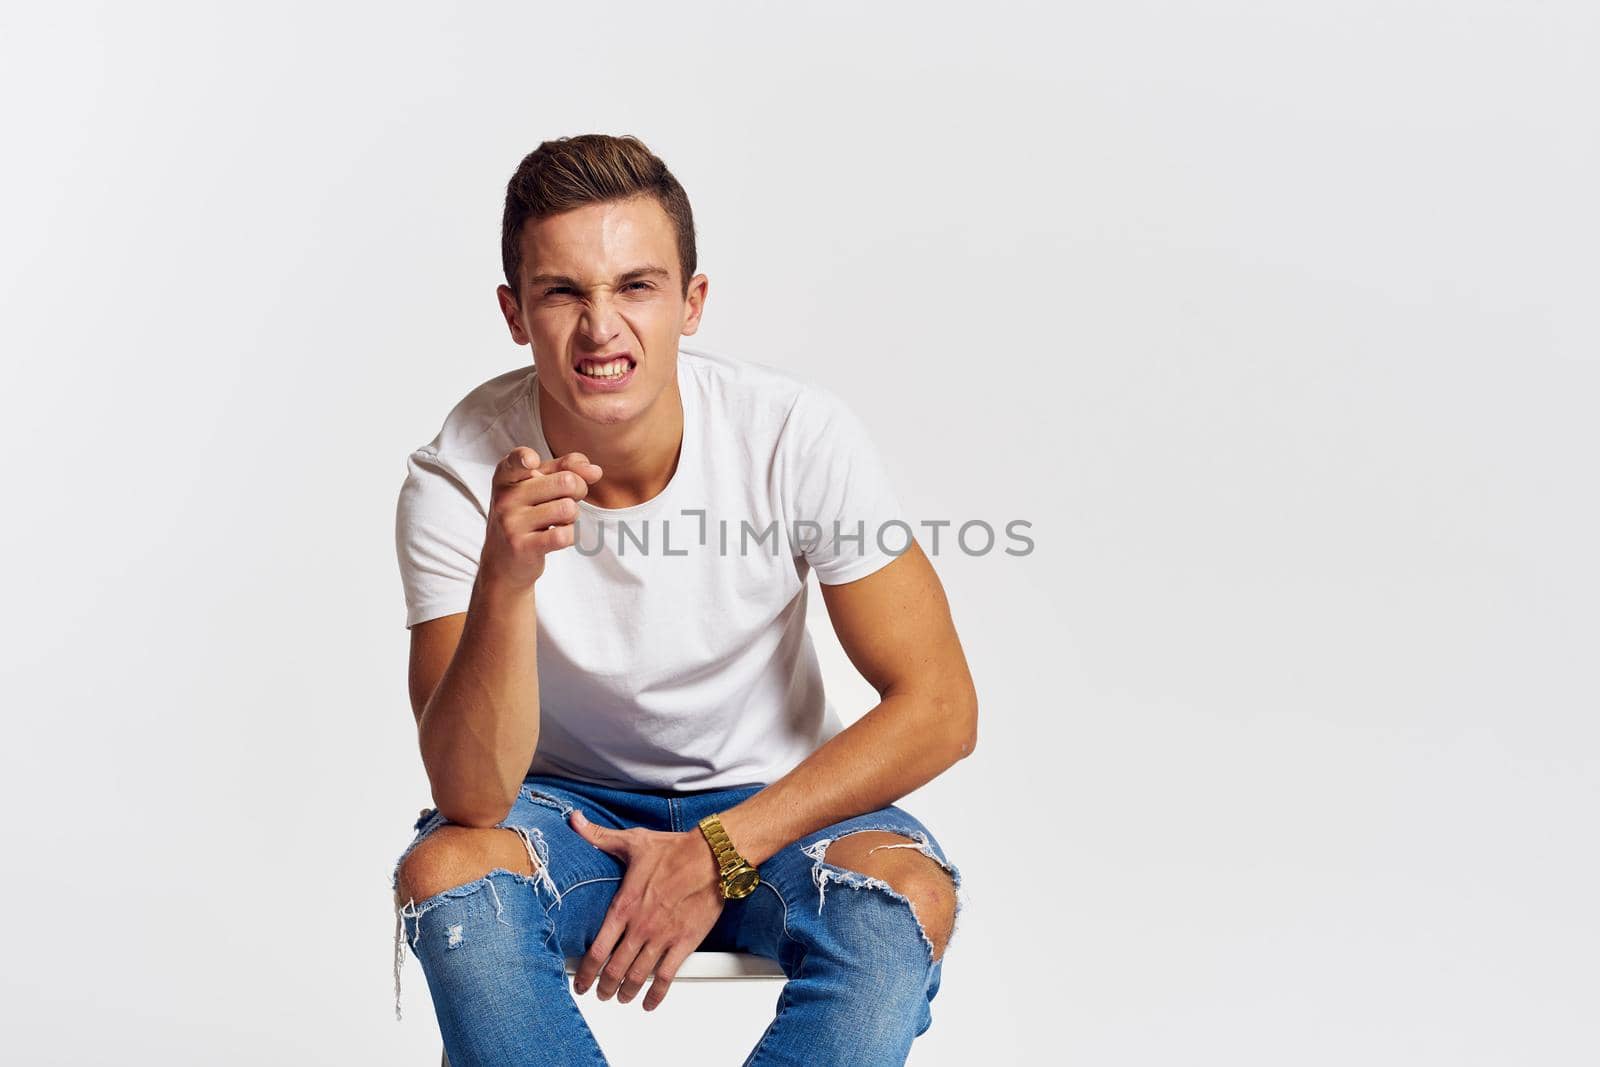 Man on a chair indoors torn jeans white t-shirt handsome face model light background. High quality photo